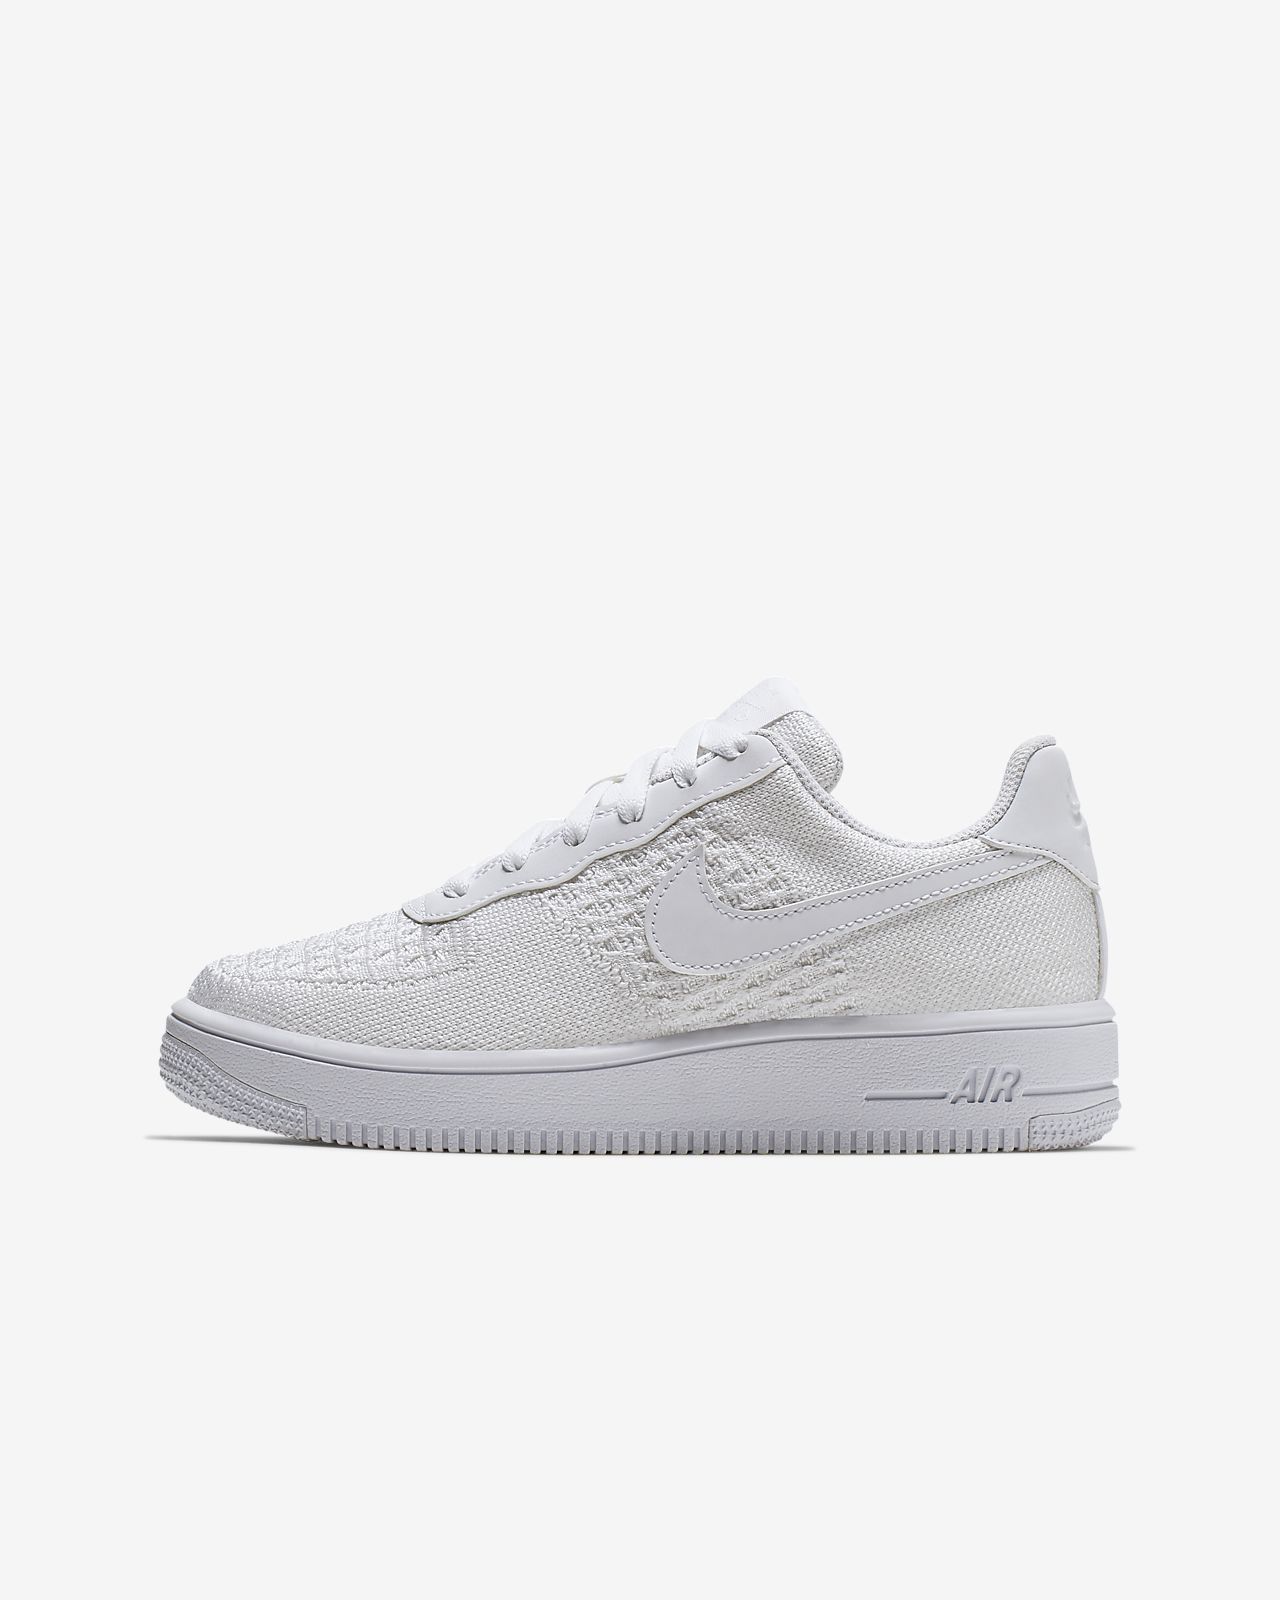 Nike Air Force 1 Flyknit 2.0 Younger/Older Kids' Shoe. Nike NL